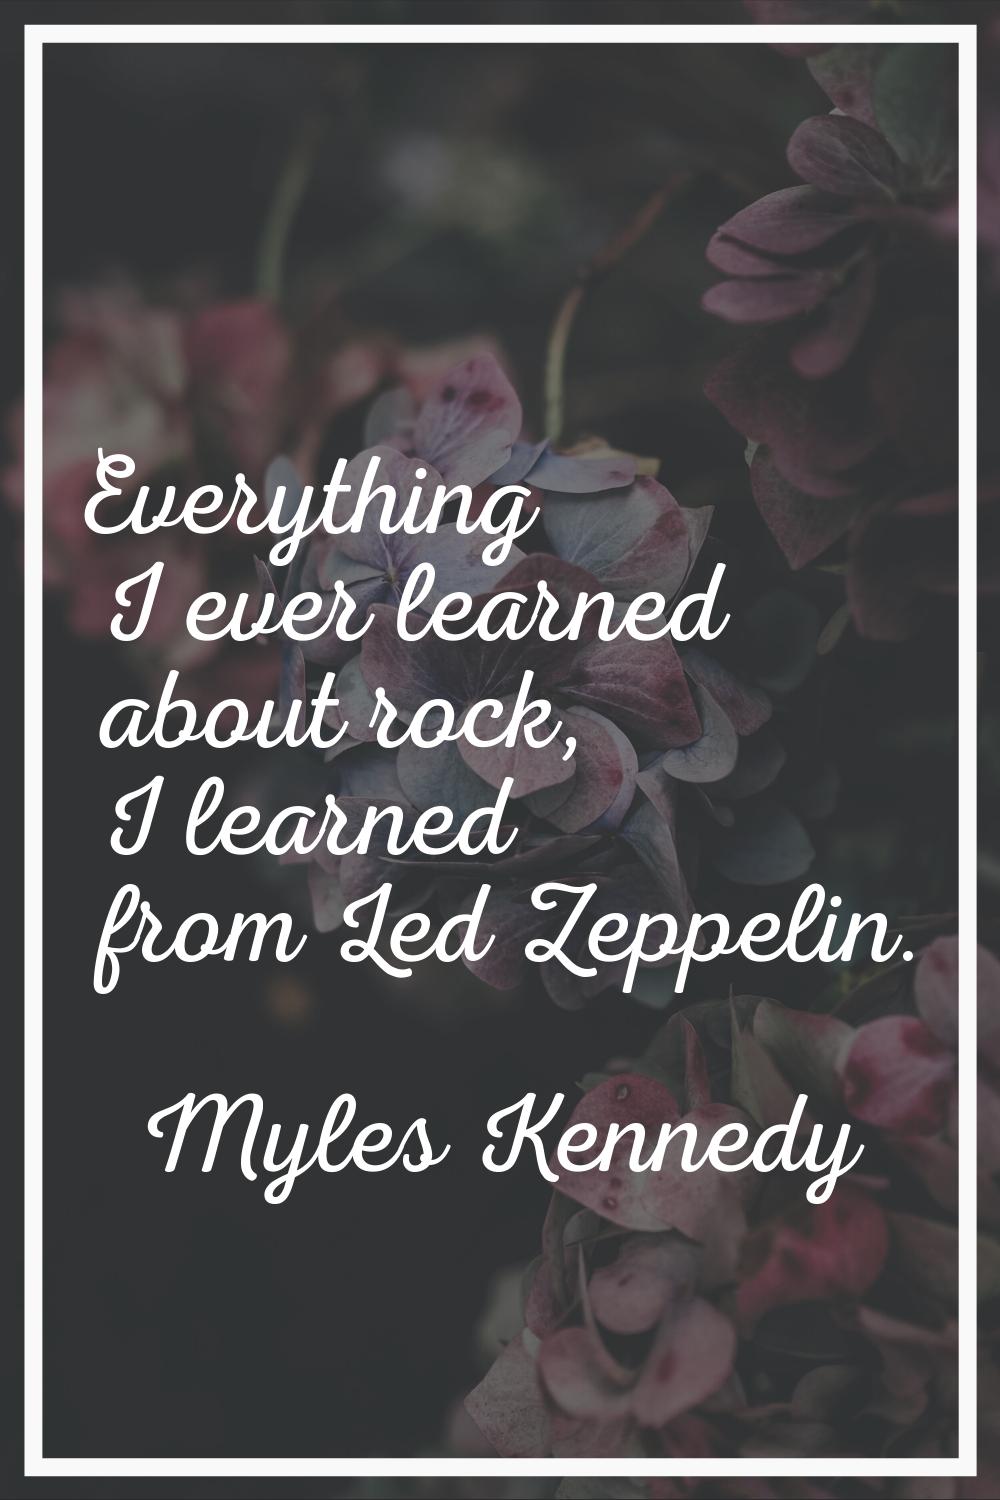 Everything I ever learned about rock, I learned from Led Zeppelin.